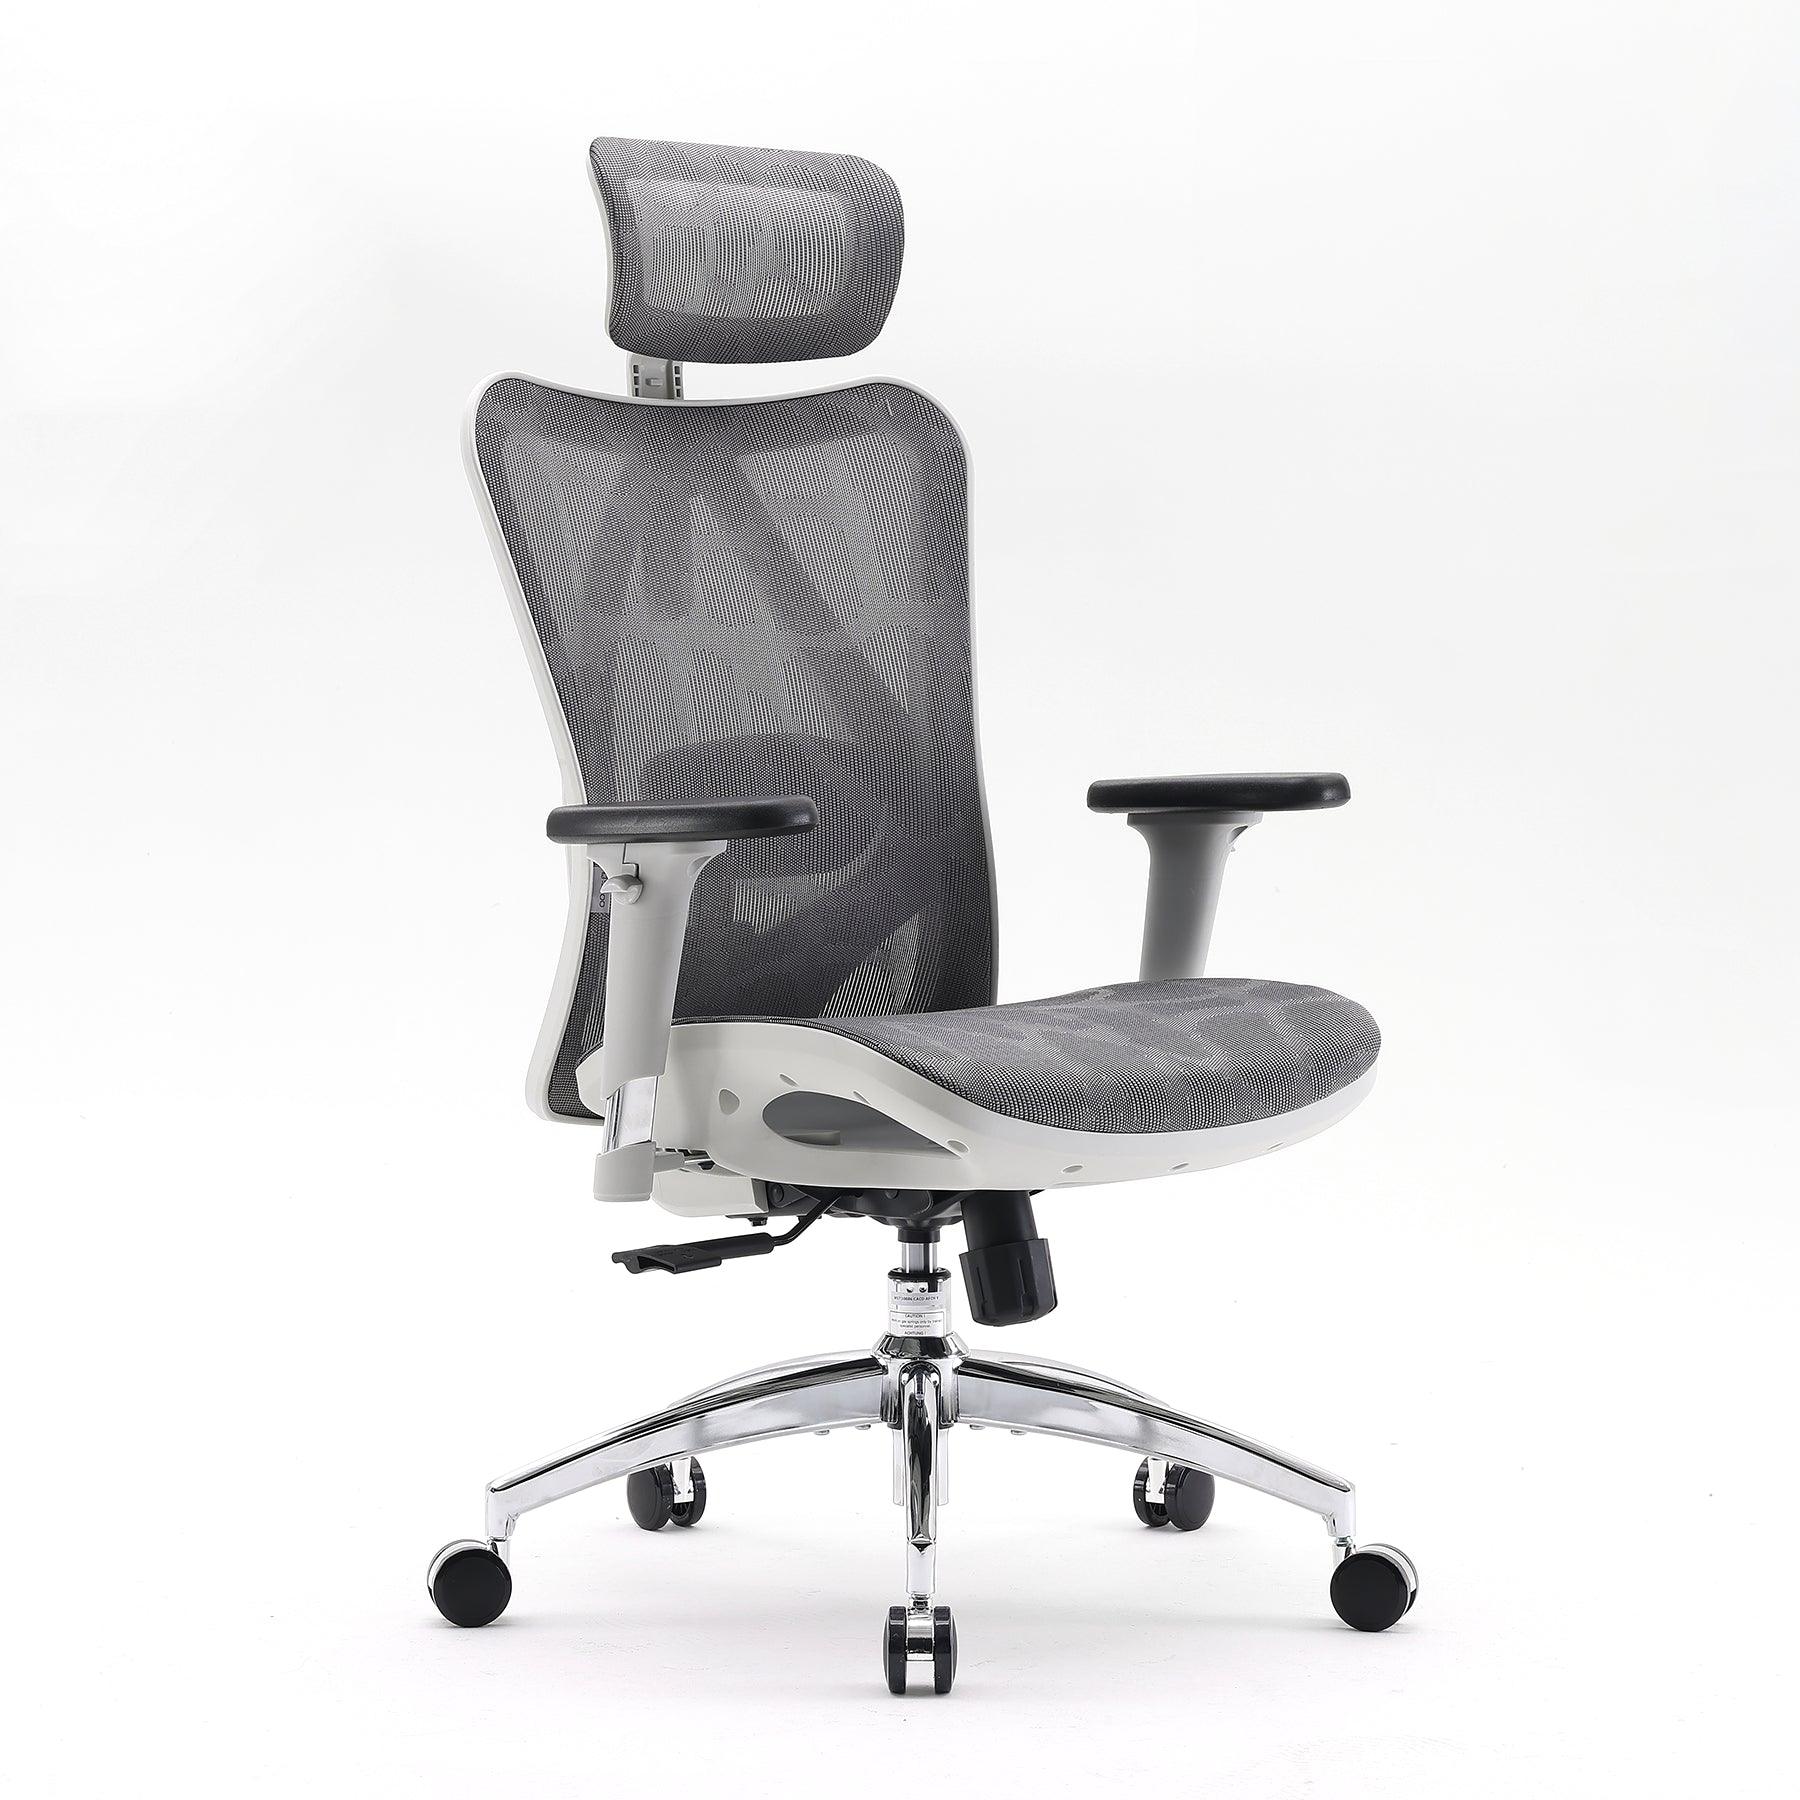 Sihoo M57 Ergonomic Office Chair with built-in footrest - Black